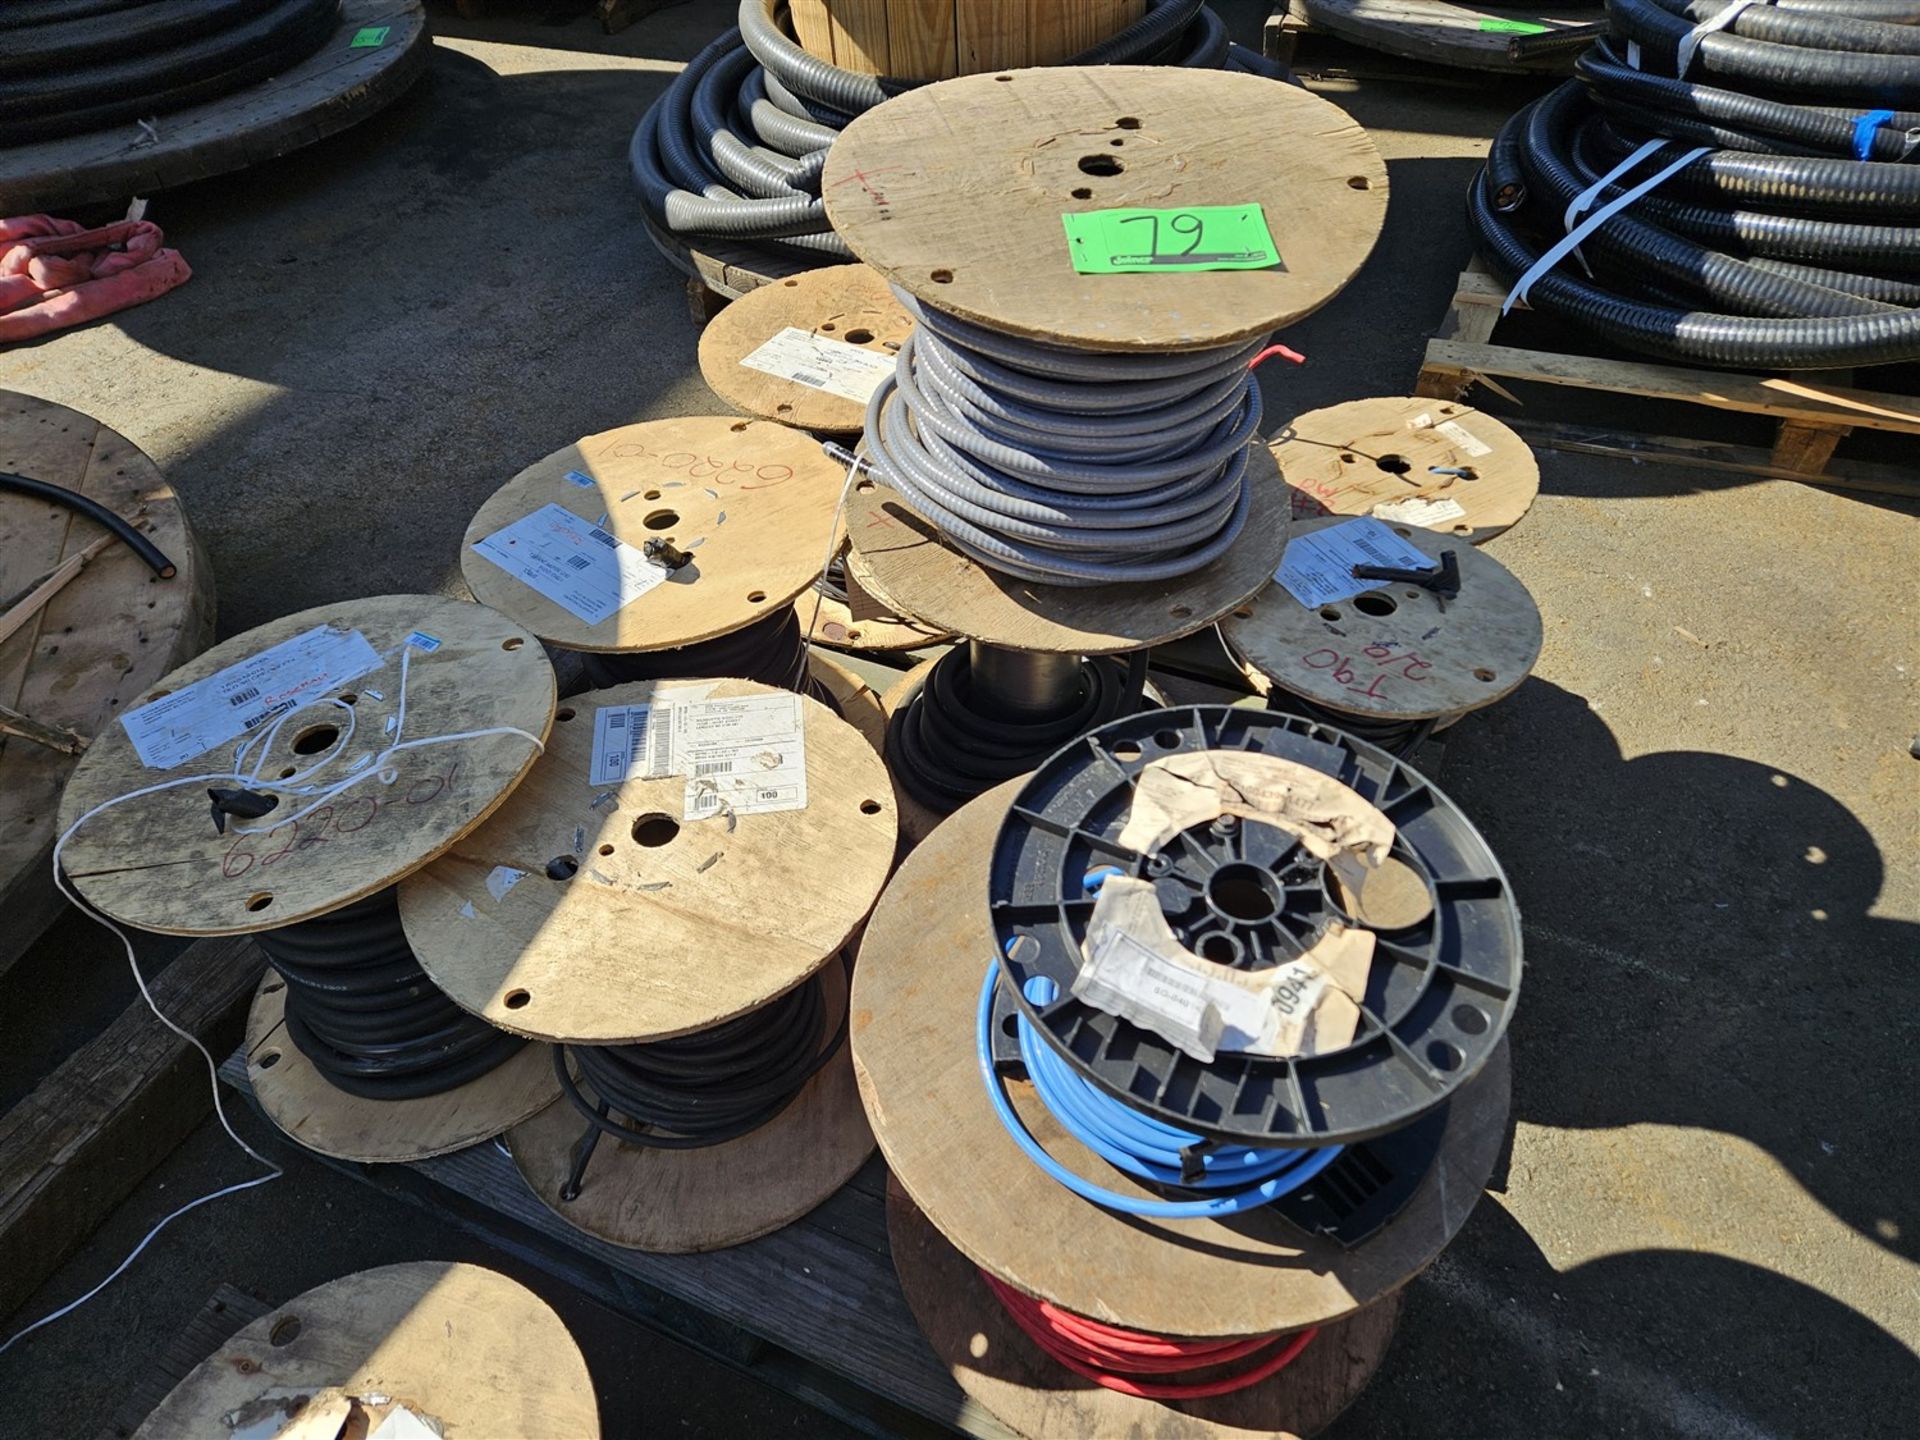 PALLET OF 10 REELS OF ASSORTED ELECTRICAL WIRE - COPPER